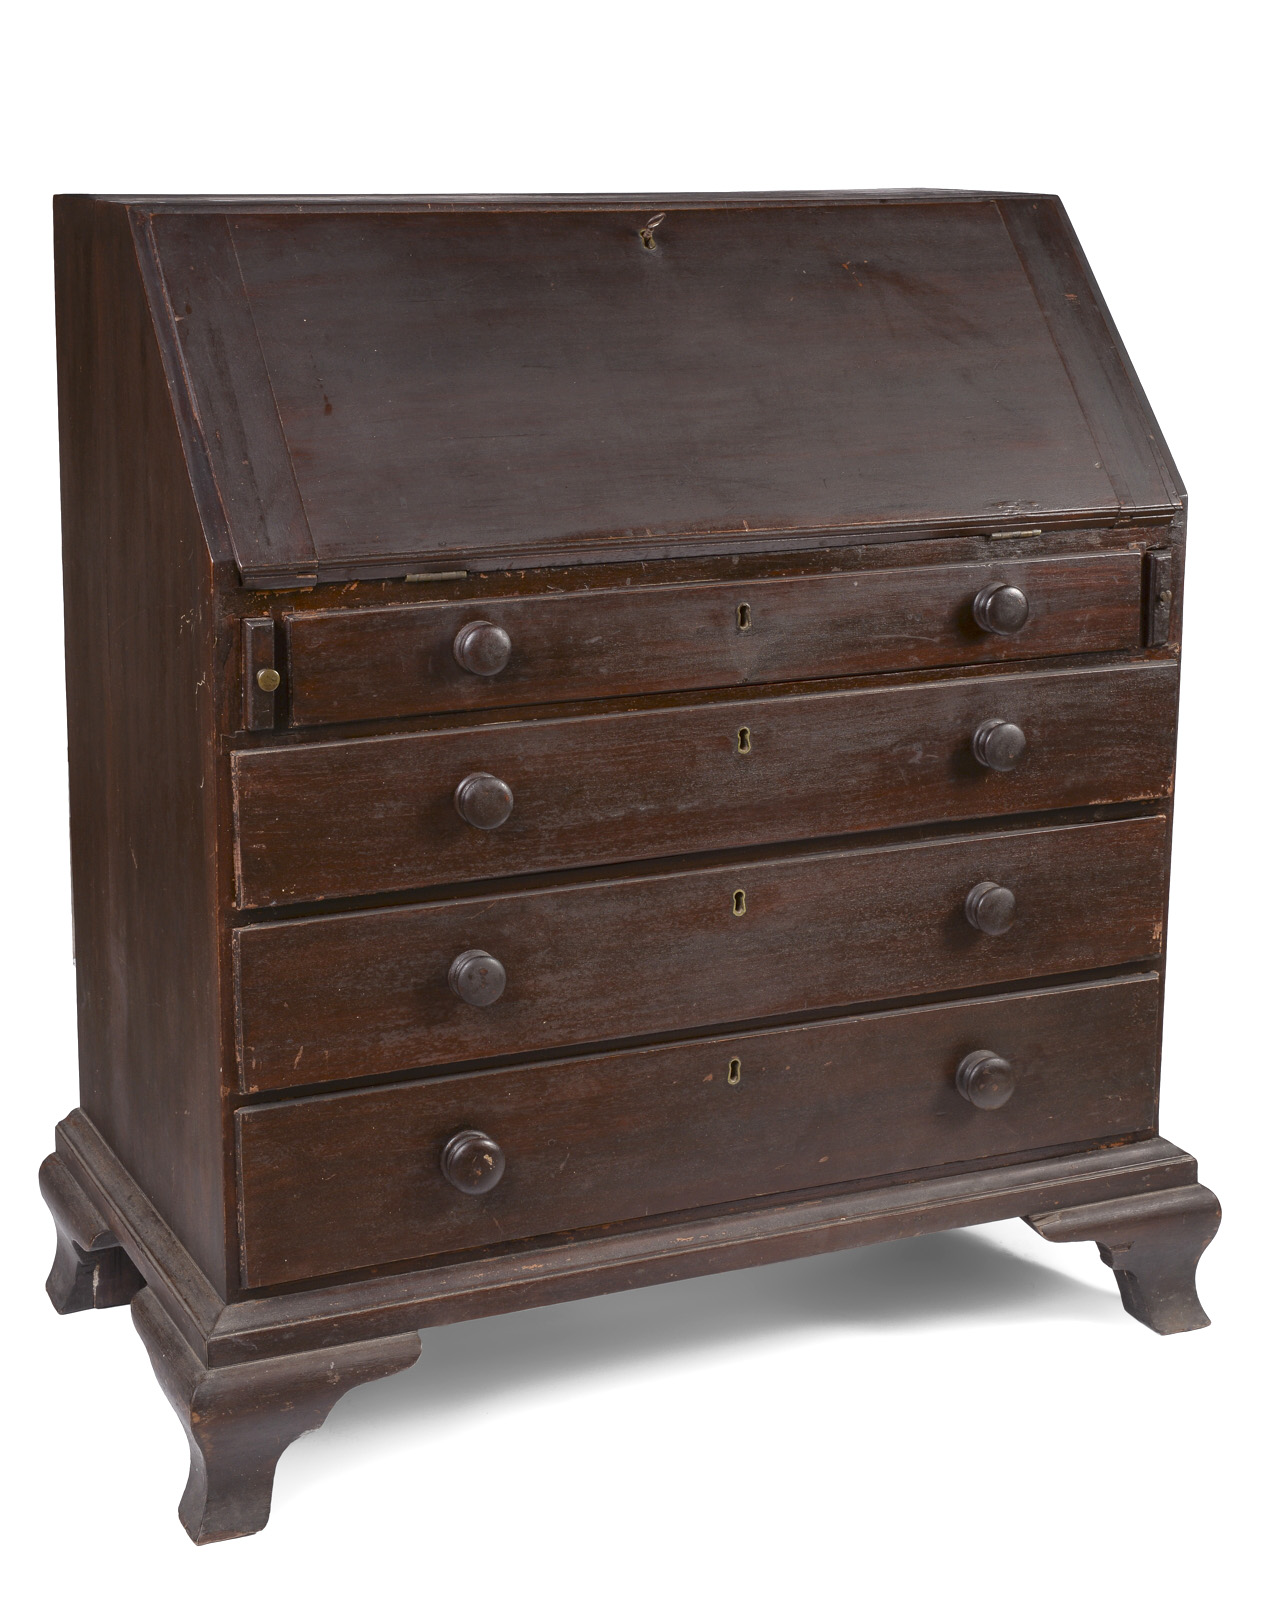 A very fine country Chippendale desk